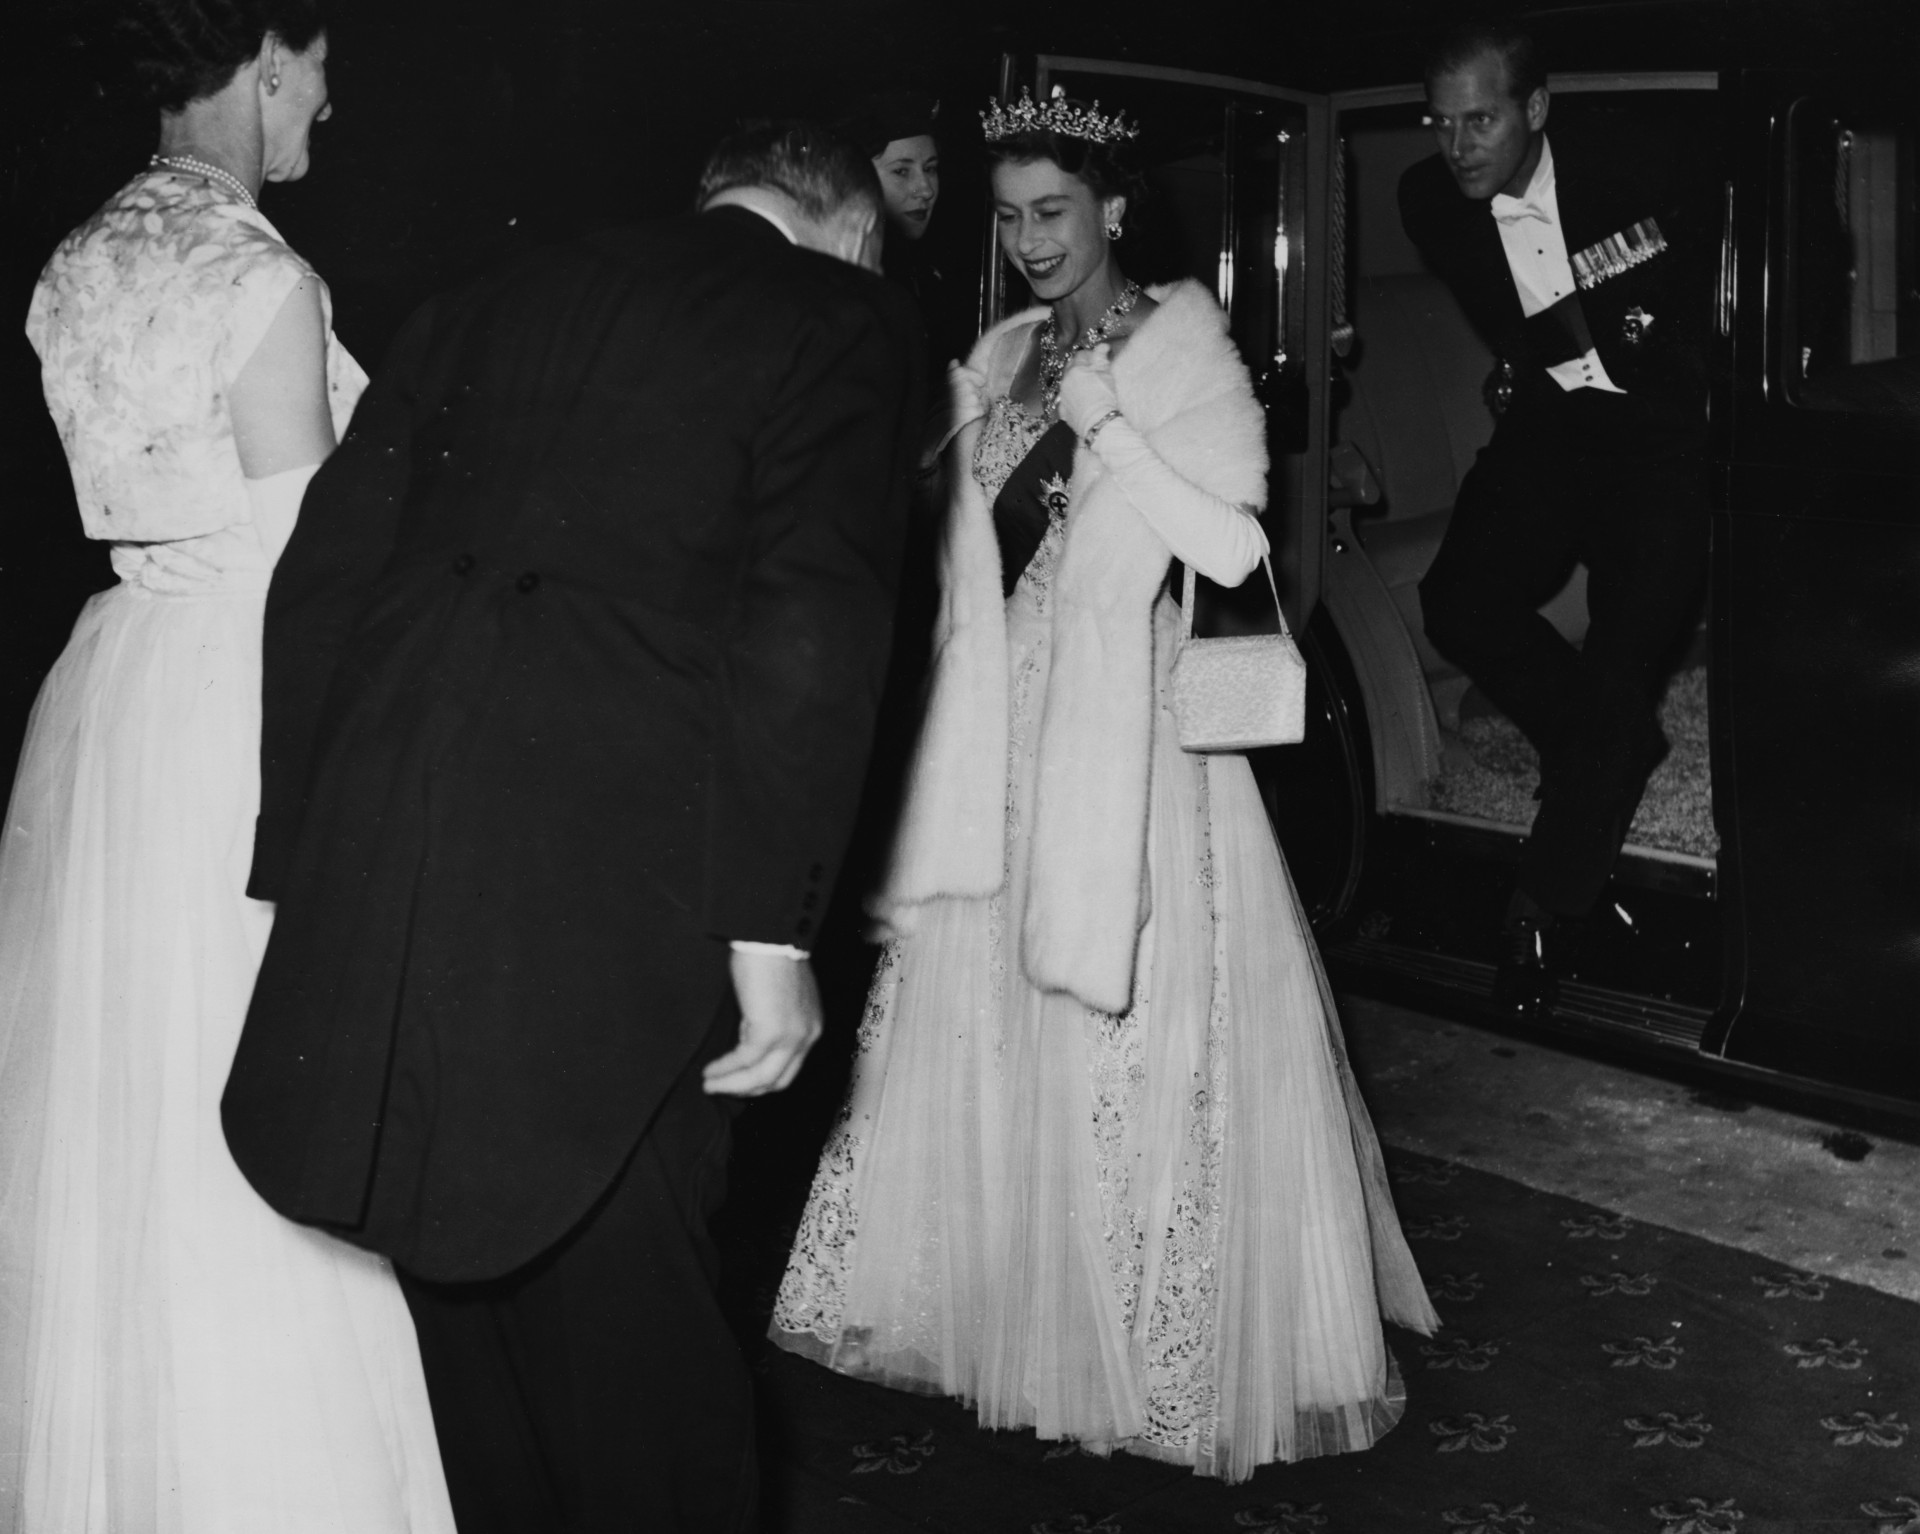 The royals are greeted by Hon T Playford and his wife on their arrival at Parliament House for a State Banquet in Australia.<p><a href="https://www.msn.com/en-za/community/channel/vid-7xx8mnucu55yw63we9va2gwr7uihbxwc68fxqp25x6tg4ftibpra?cvid=94631541bc0f4f89bfd59158d696ad7e">Follow us and access great exclusive content every day</a></p>